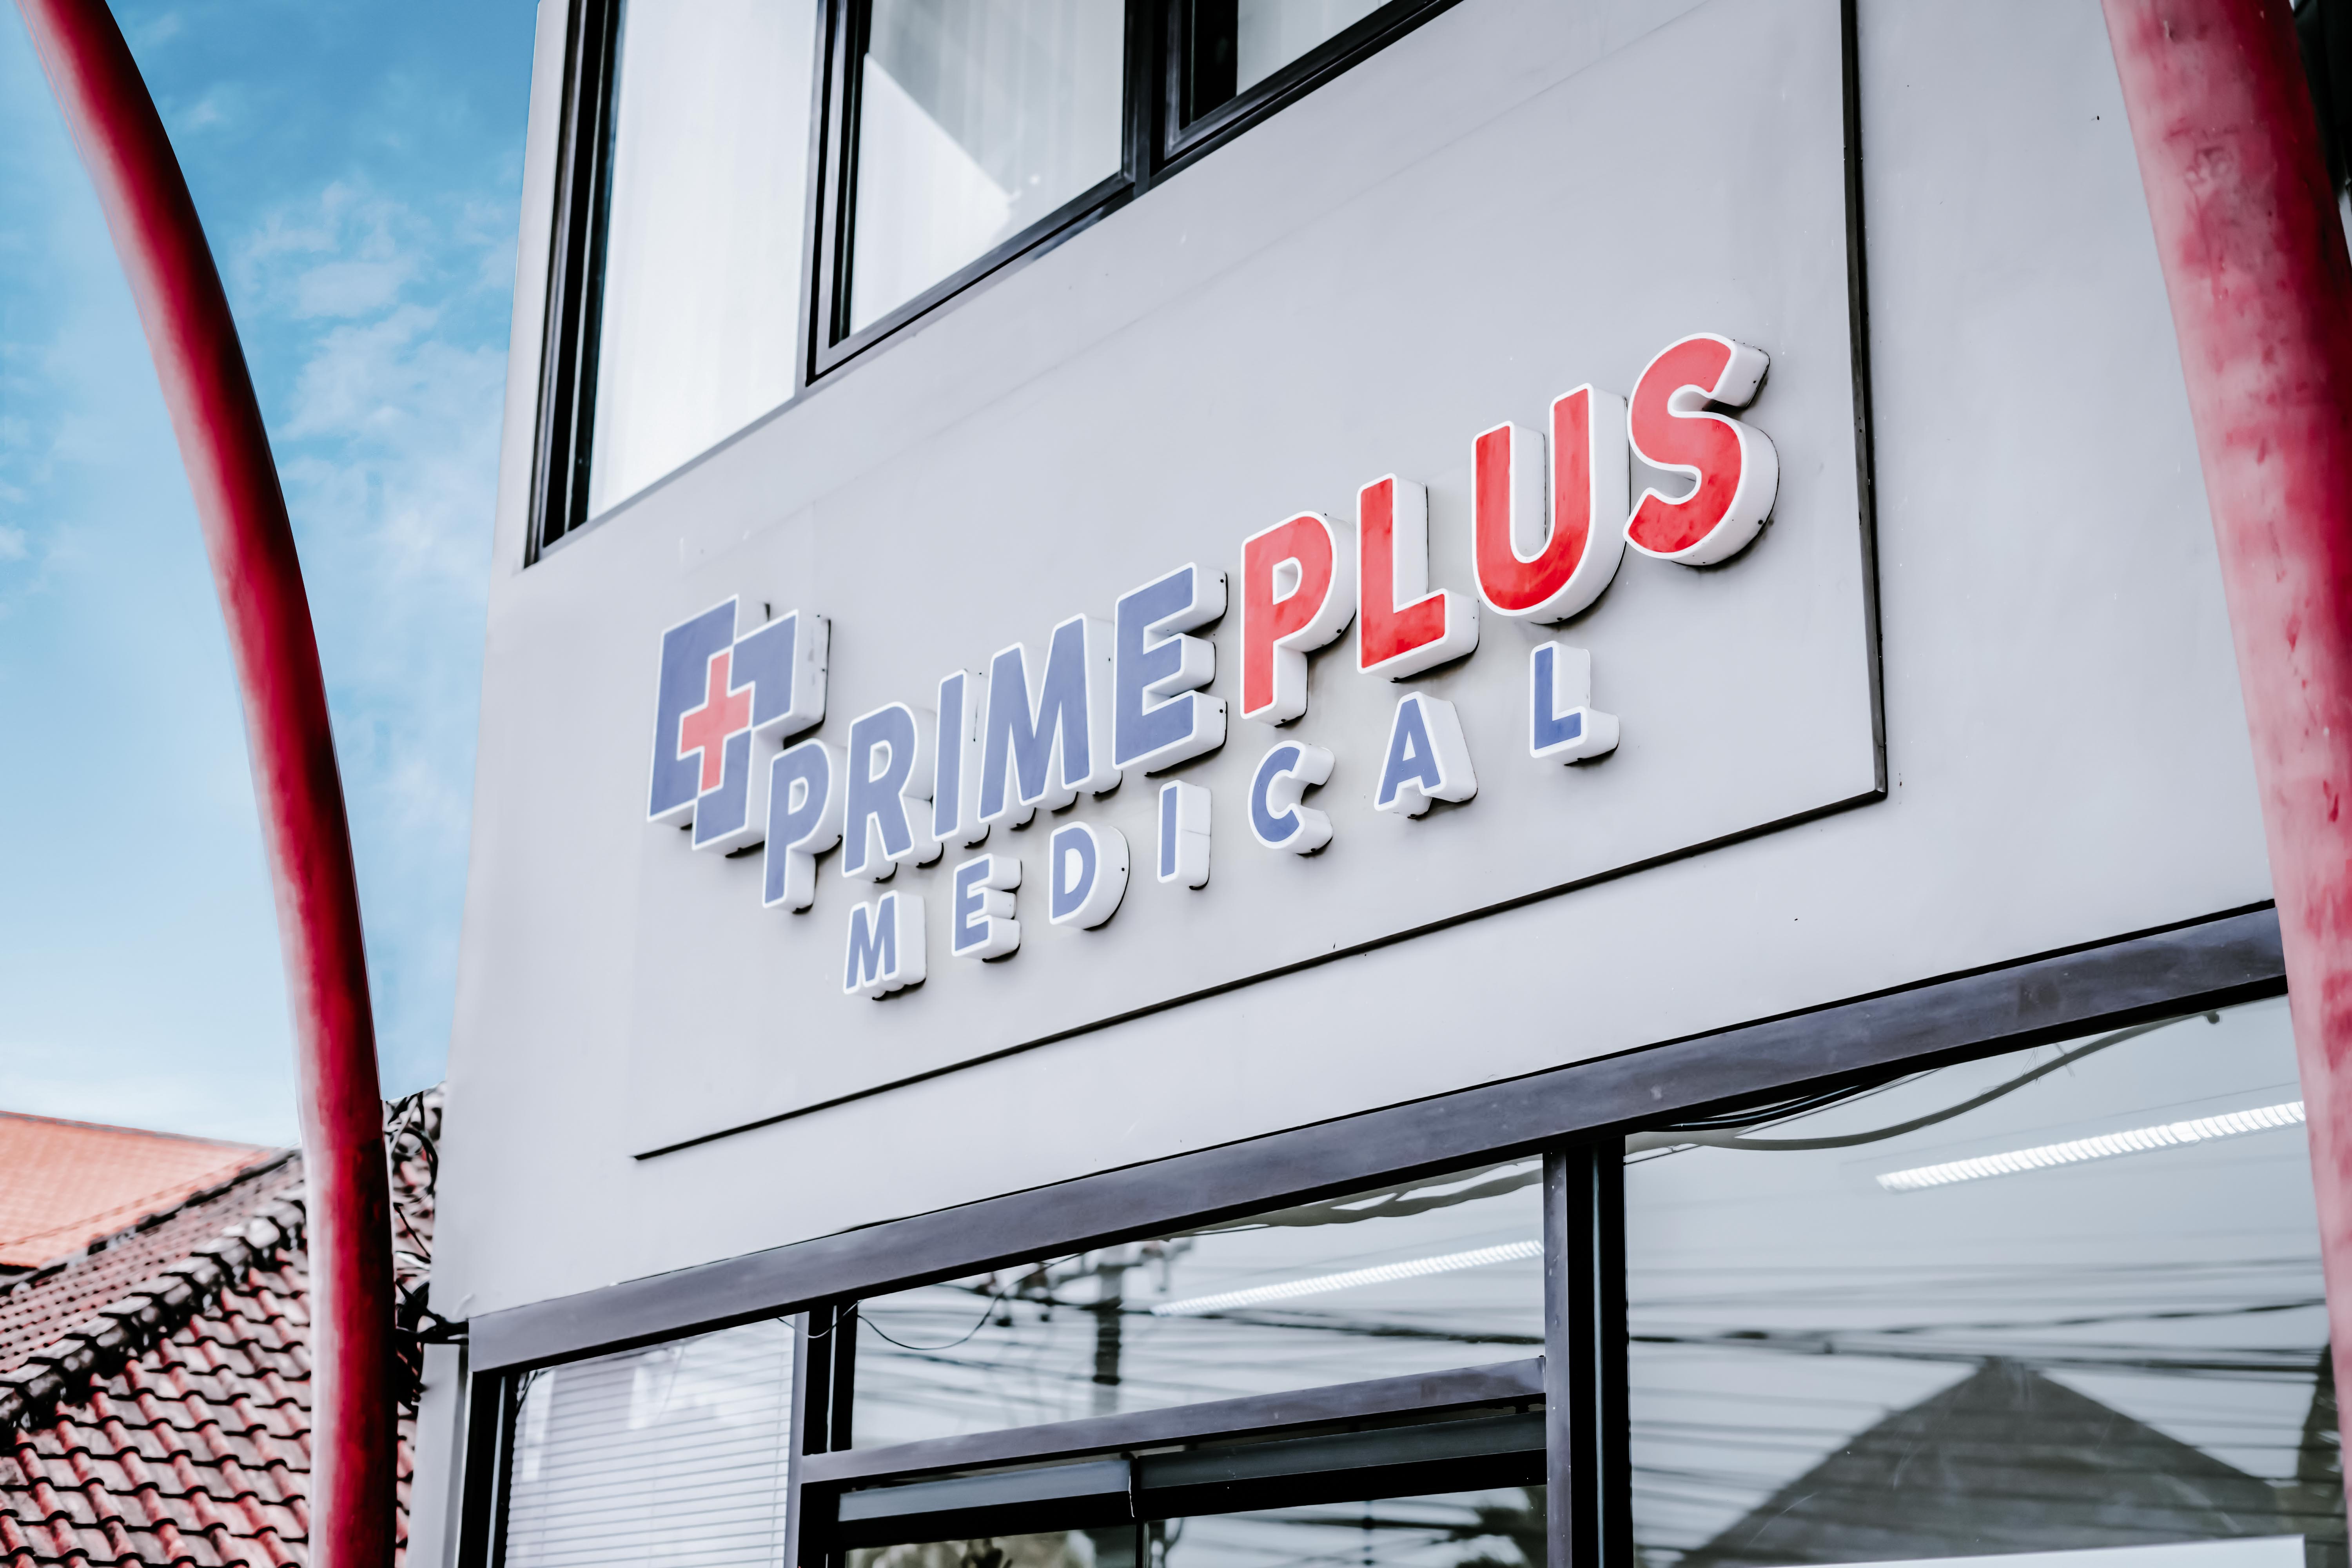 CLINIC NEAR ME - 24/7 On-Call Doctor Service - Prime Plus ...